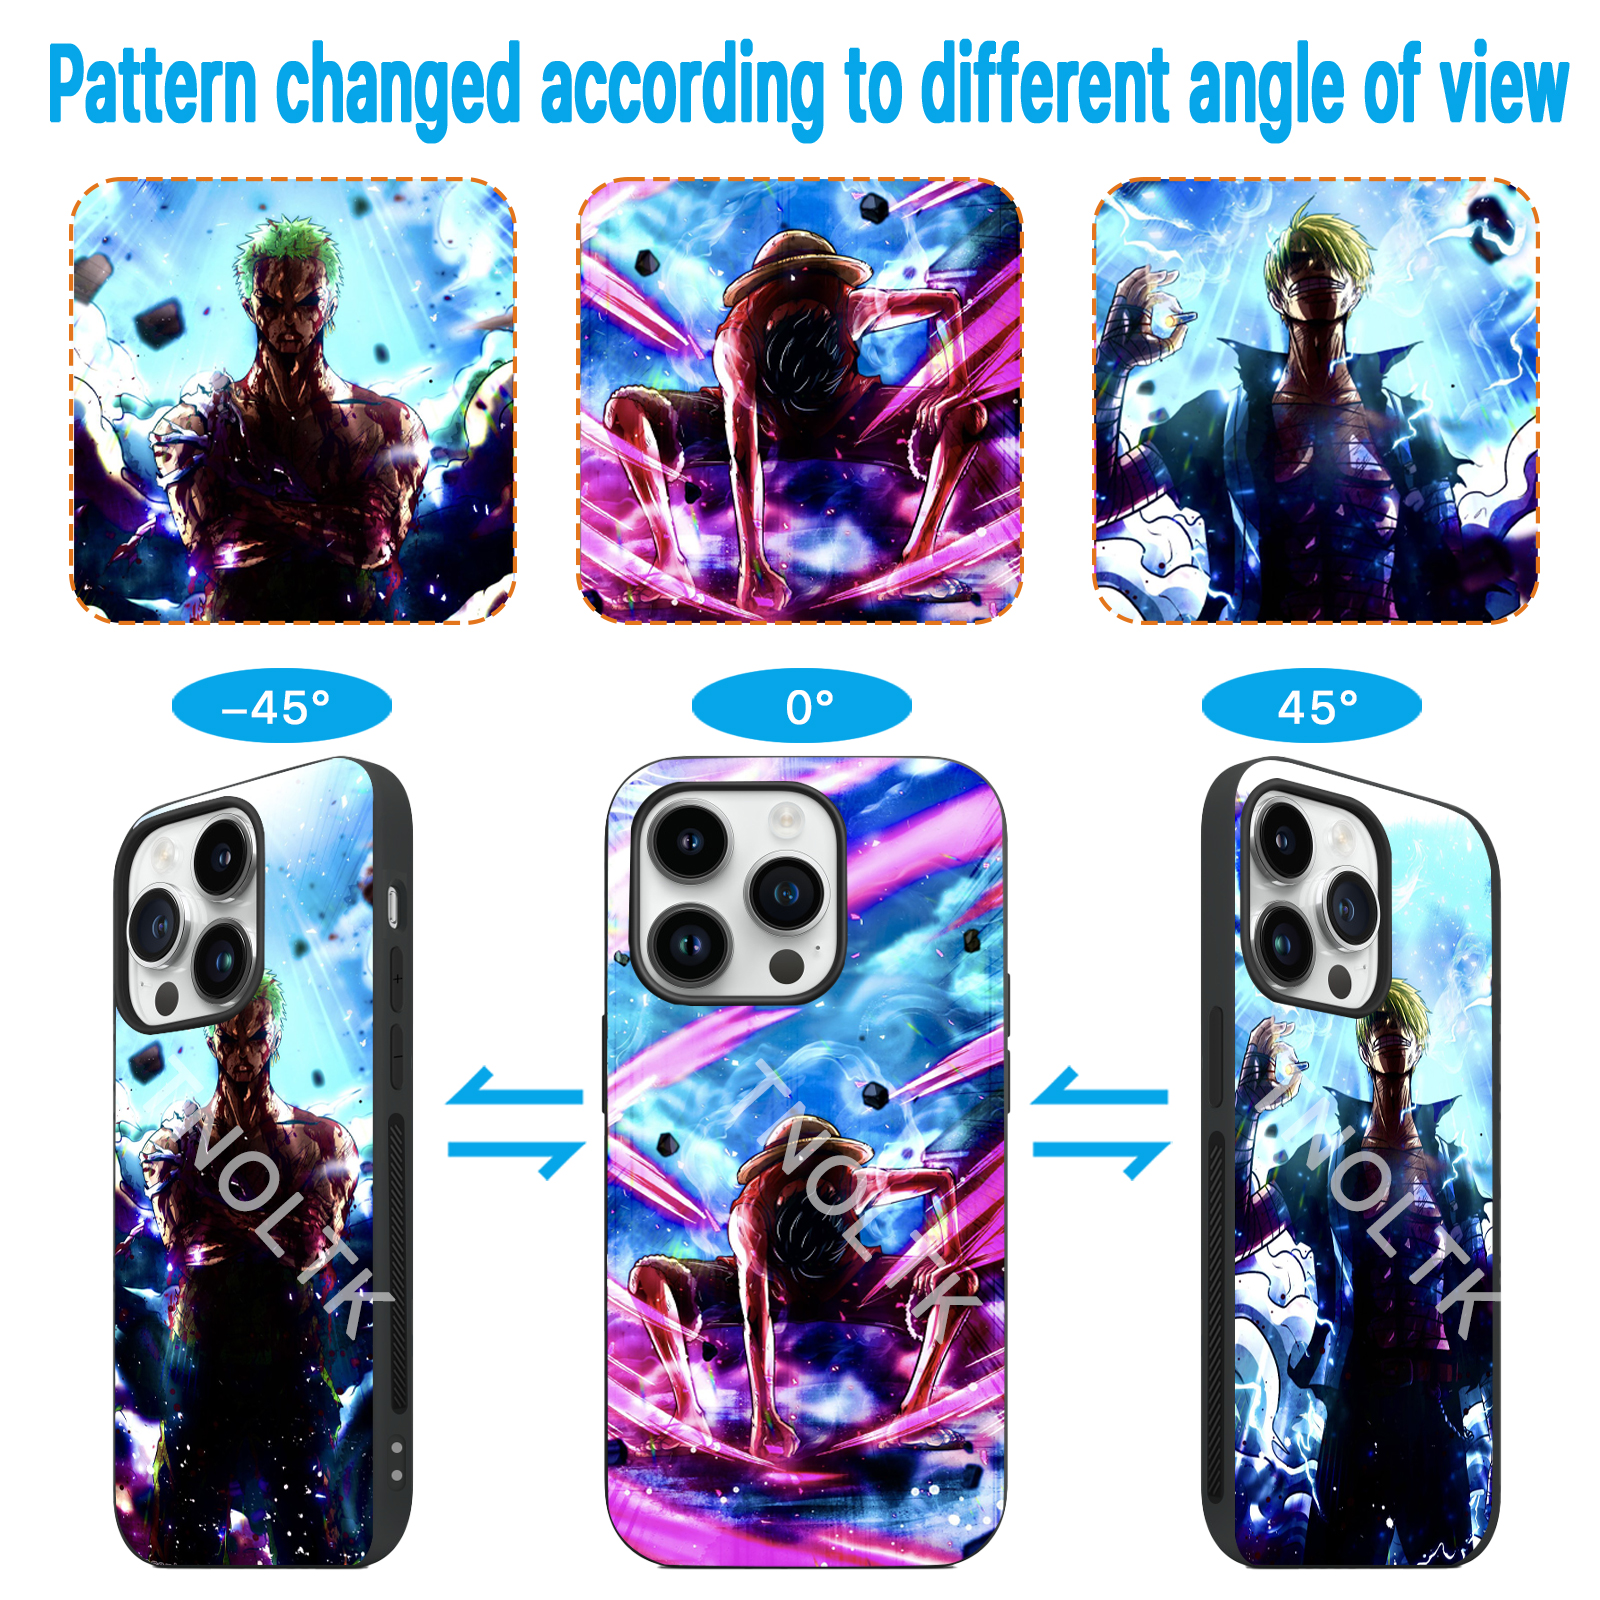 3D Motion iPhone One piece Anime Phone Cases